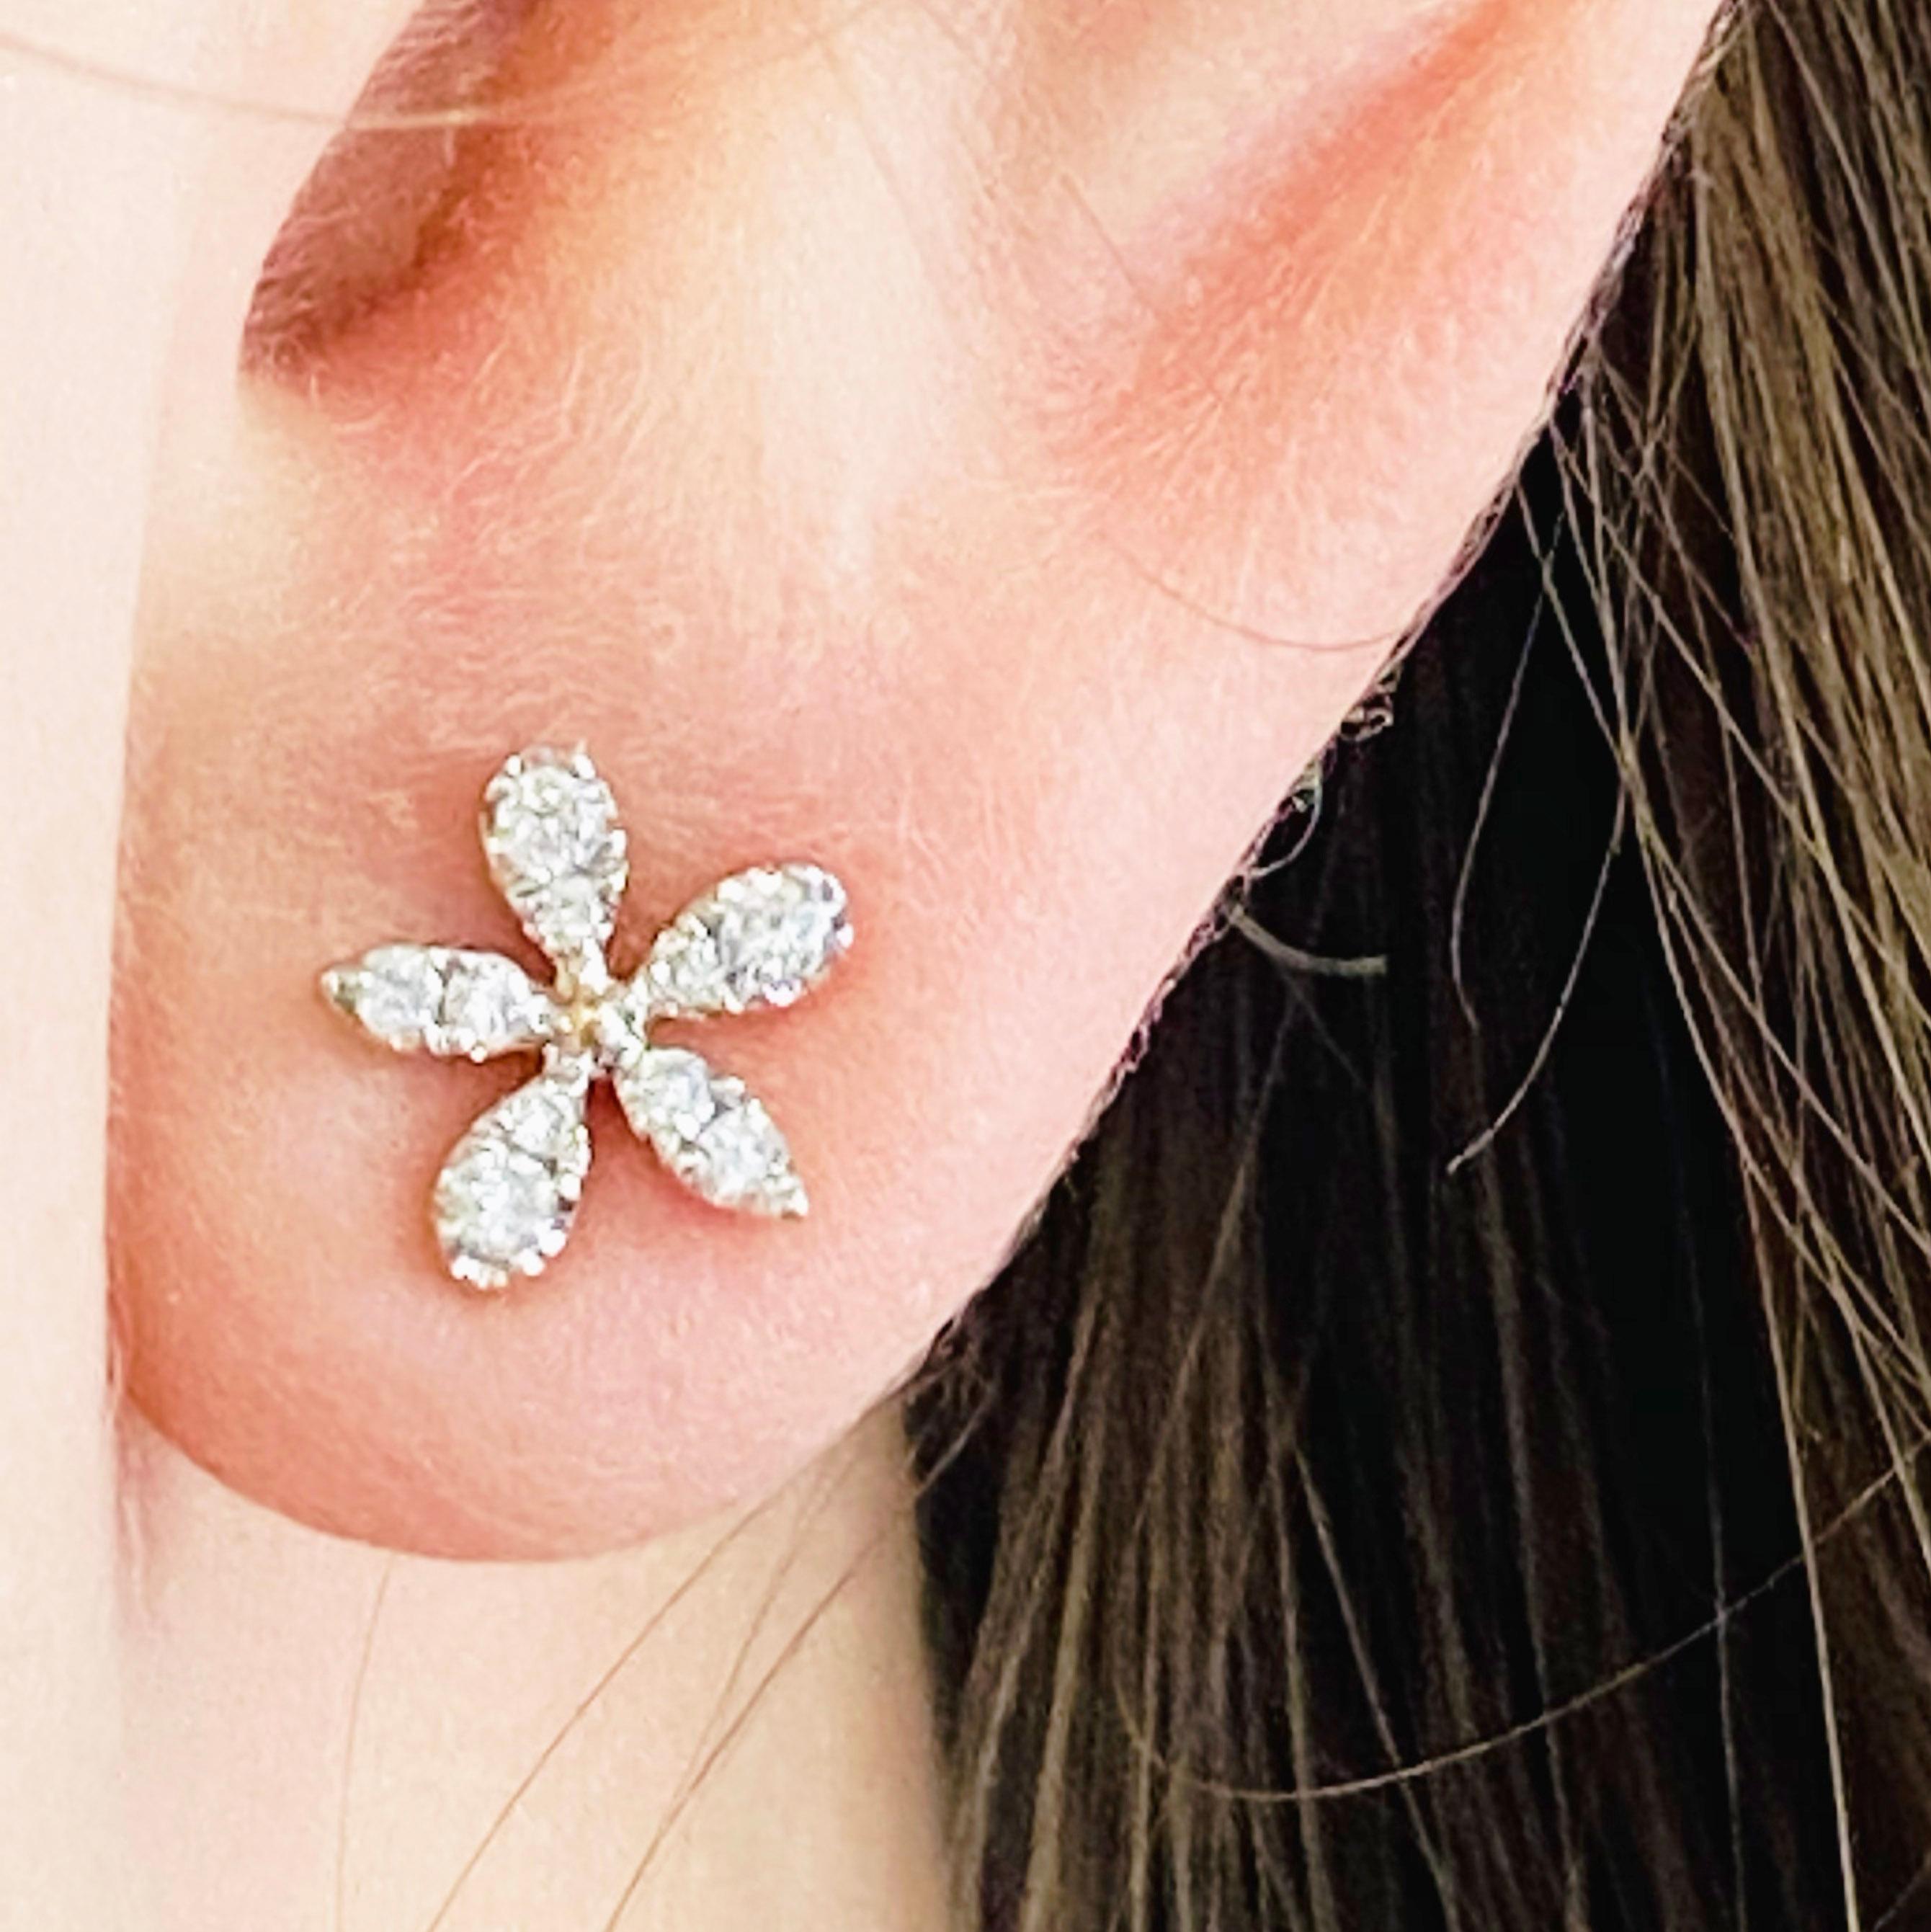 These stunning 14k yellow gold flower stud earrings dripping with diamonds provide a look that is both trendy and classic. These diamond earrings are a great staple to add to your collection, and can be worn with both casual and formal wear.  These